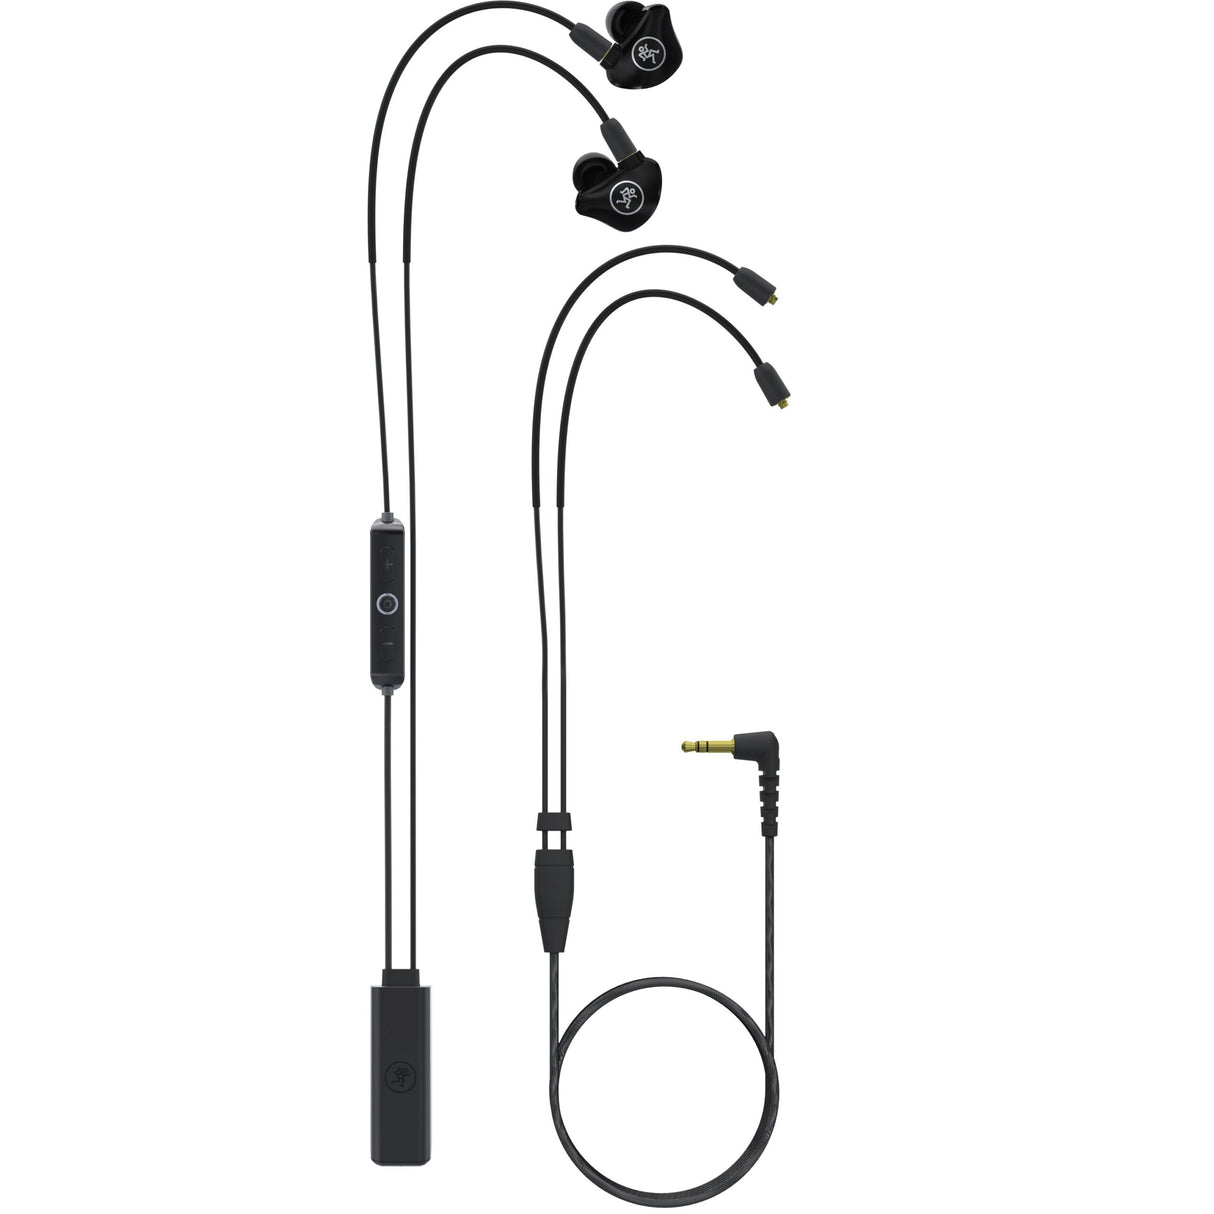 Mackie MP-240 BTA Dual Hybrid Driver Professional In-Ear Monitors with Bluetooth Adapter